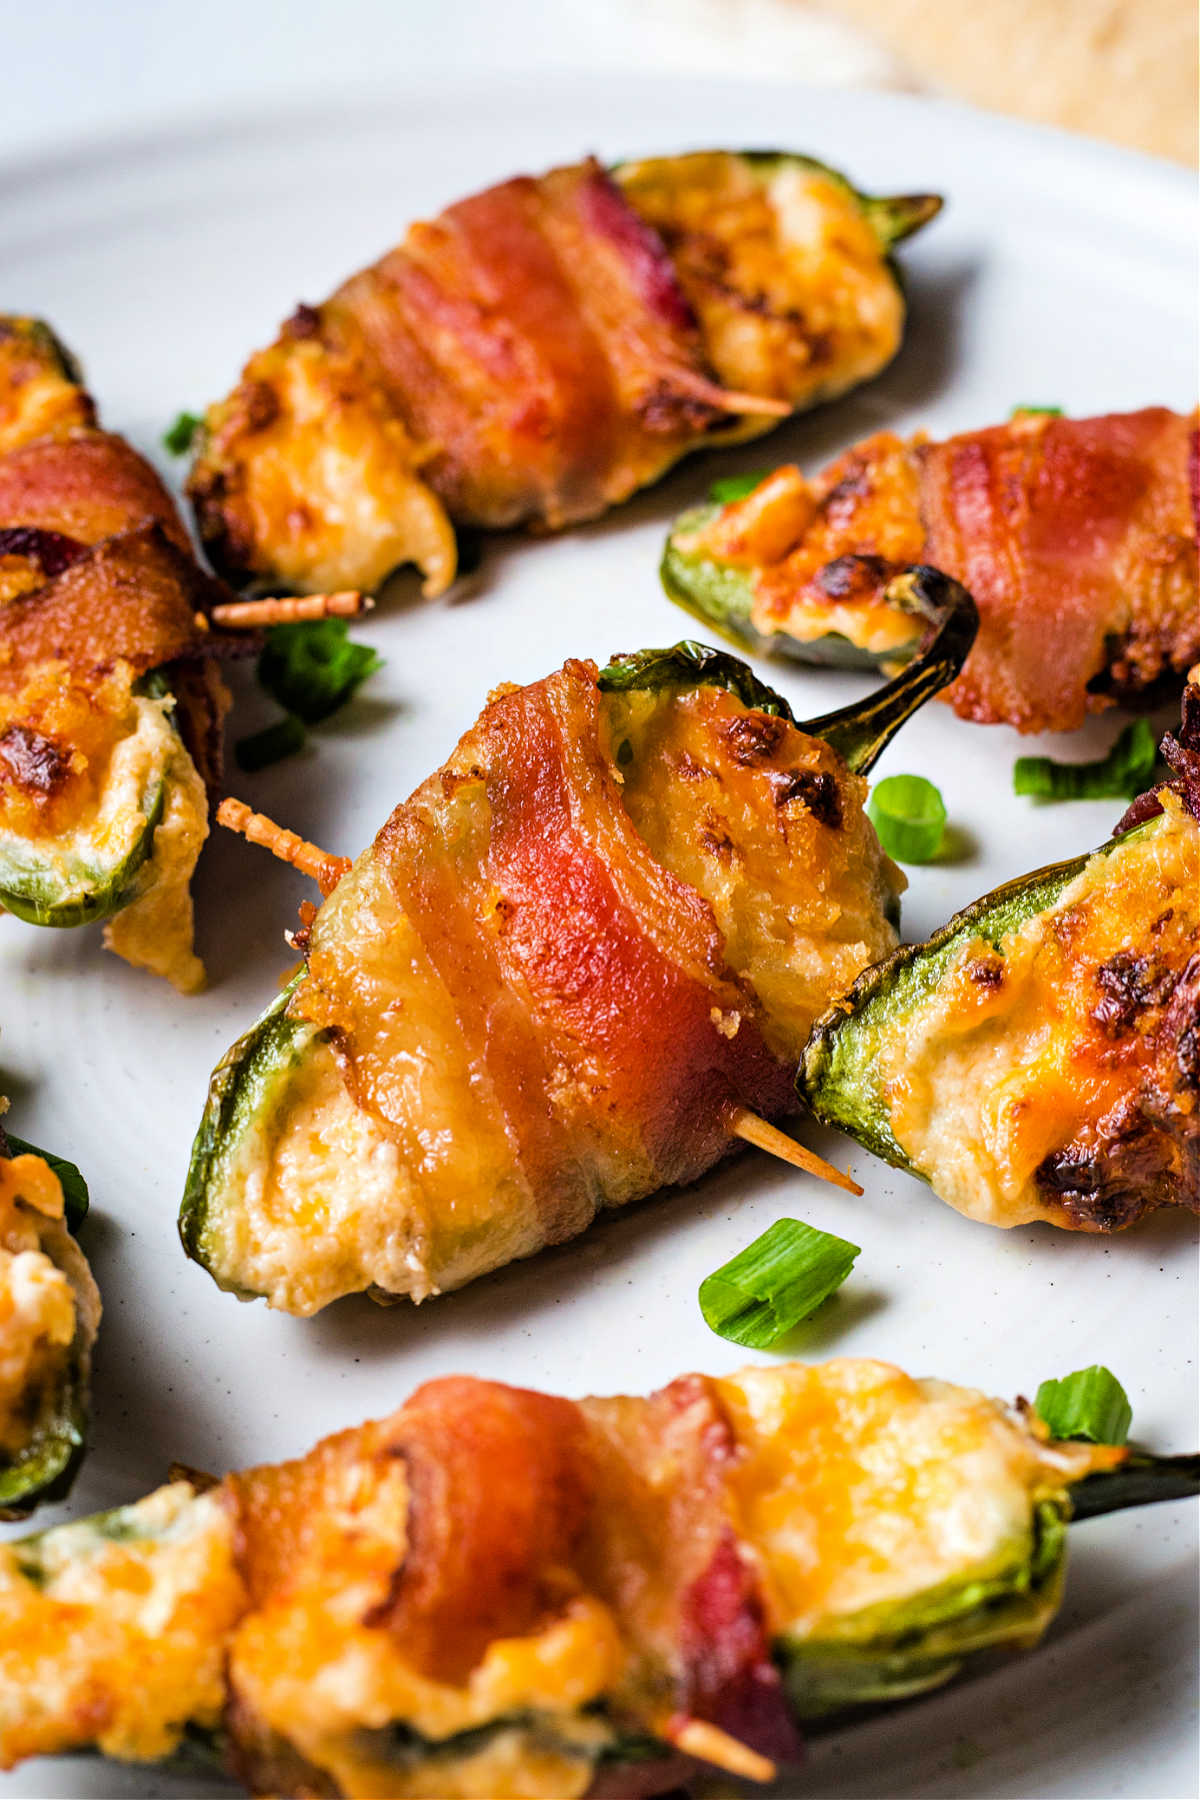 bacon wrapped jalapeno poppers on a white plate garnished with sliced green onion tops.